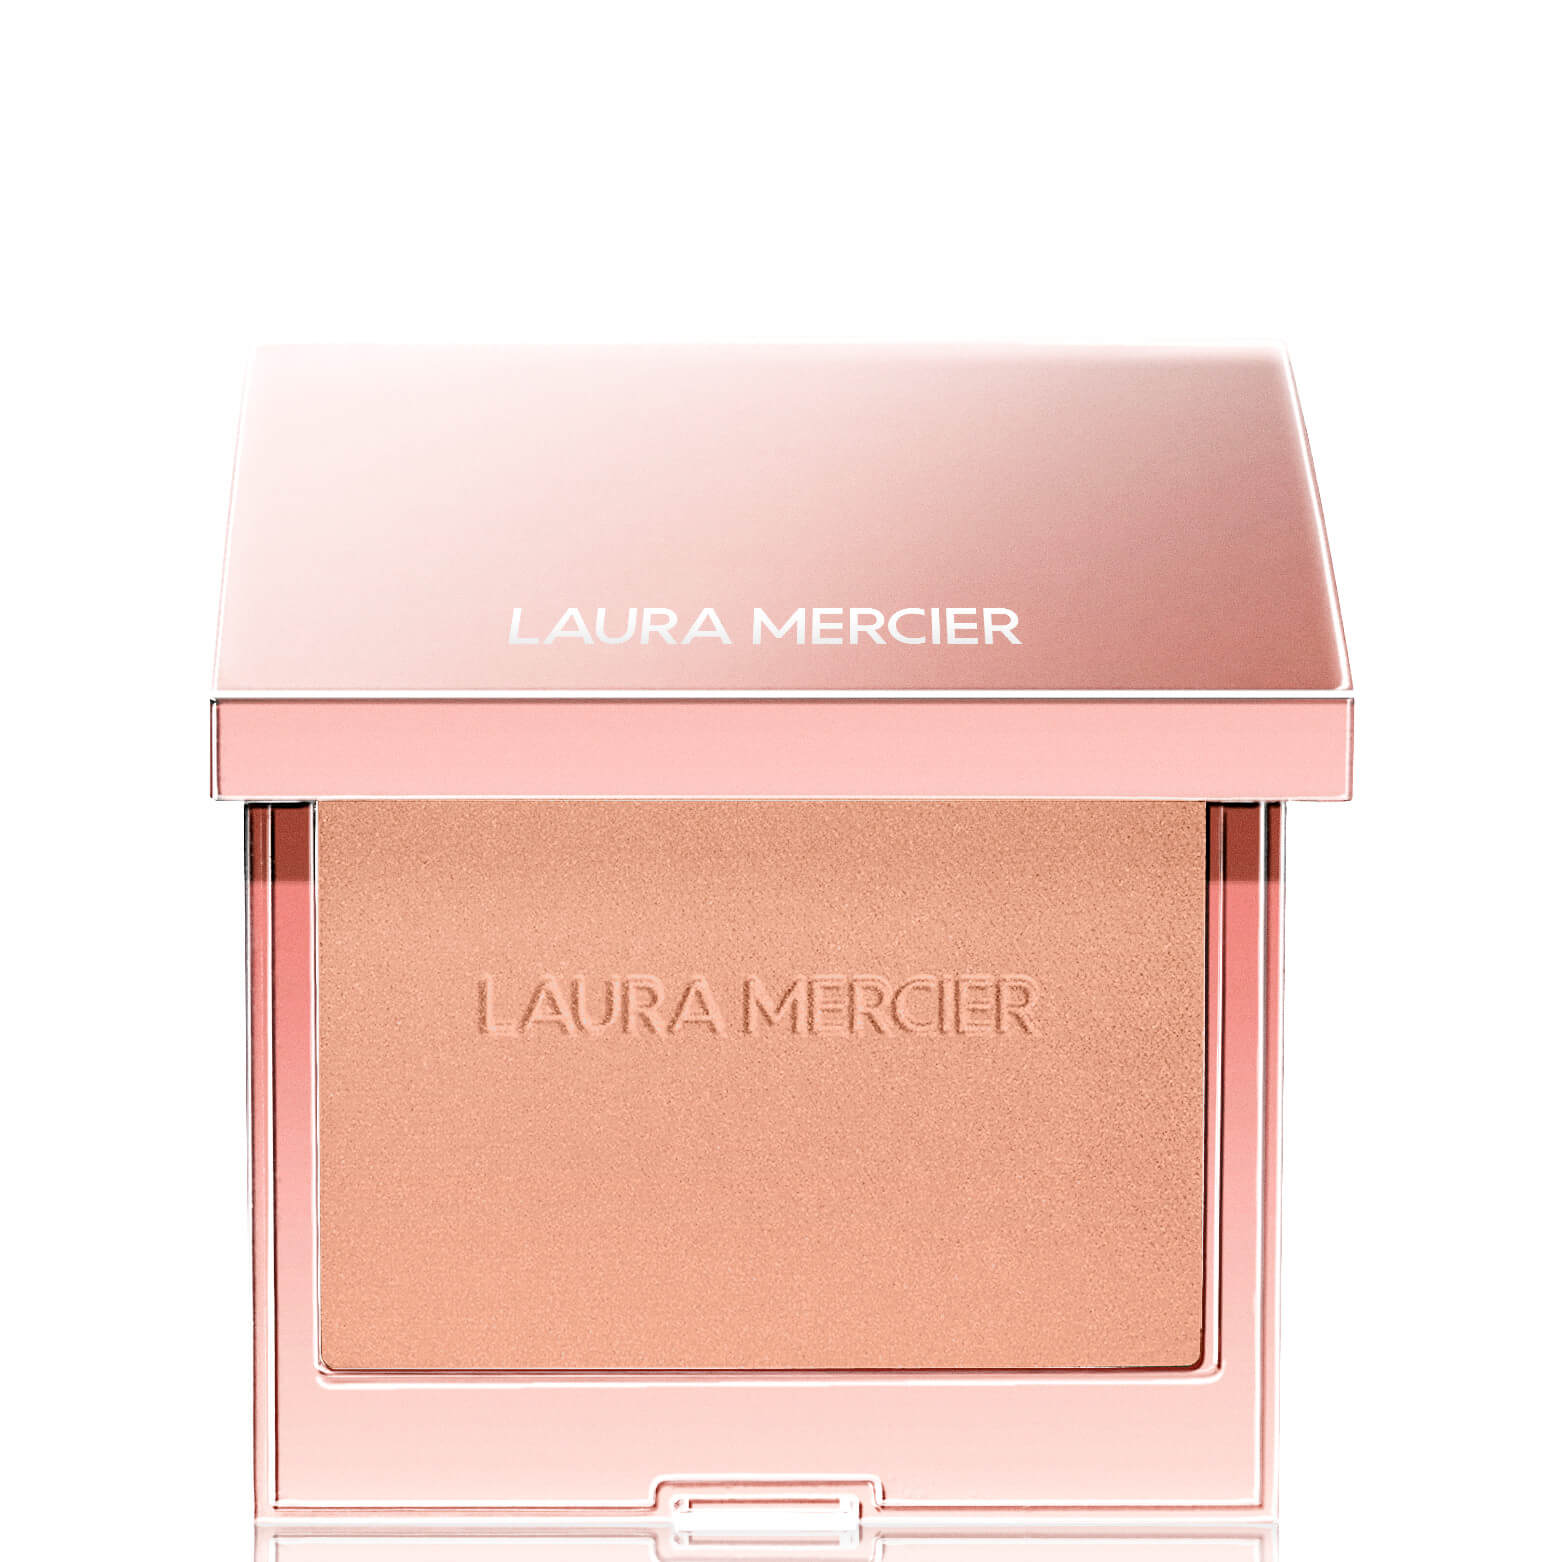 Image of Laura Mercier Blush Colour Infusion Blusher 6g (Various Shades) - Peach Shimmer